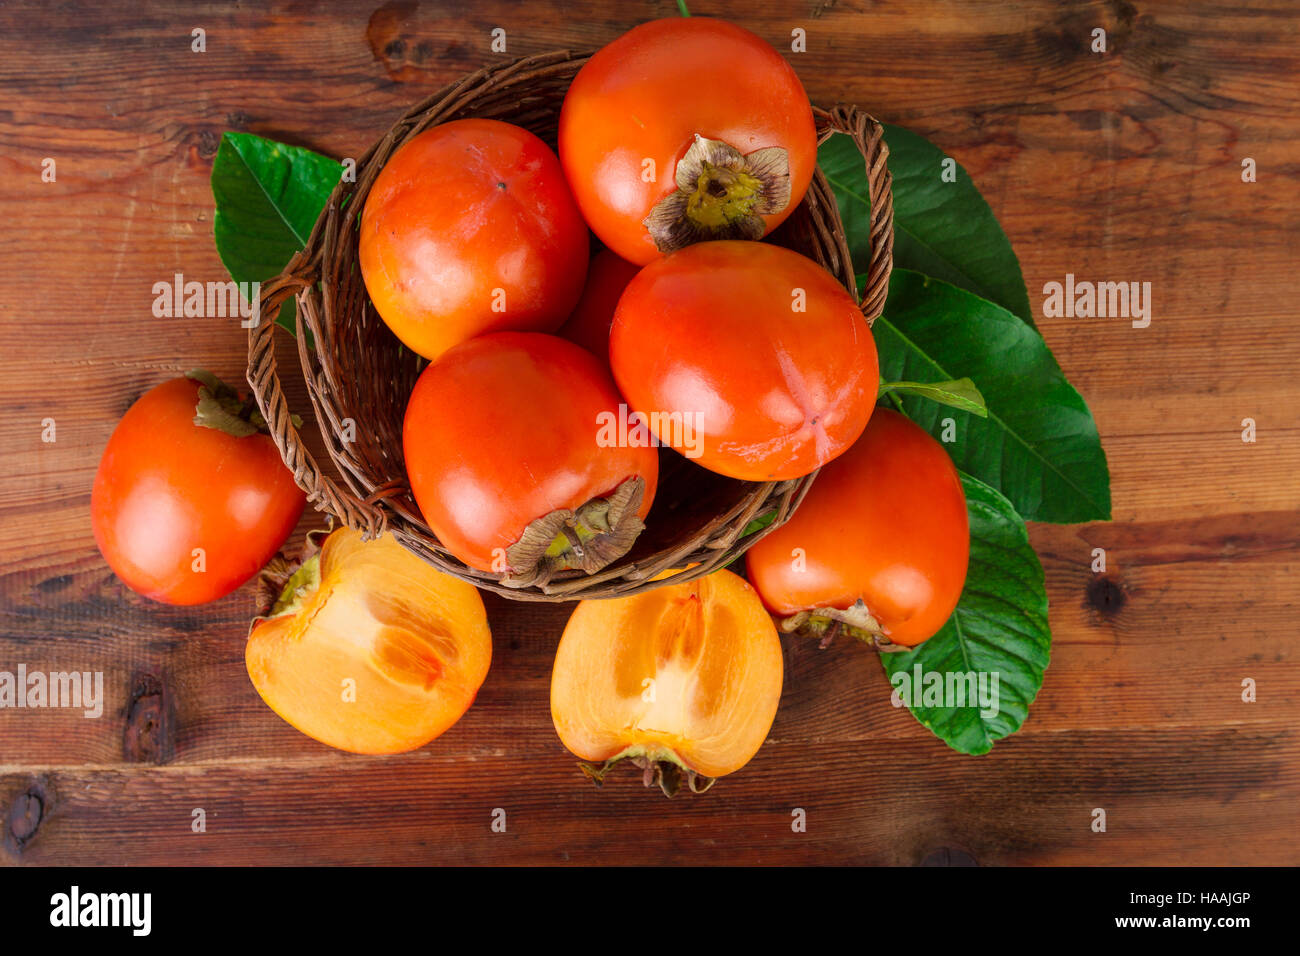 Persimmons on dark wood. Top view. Stock Photo